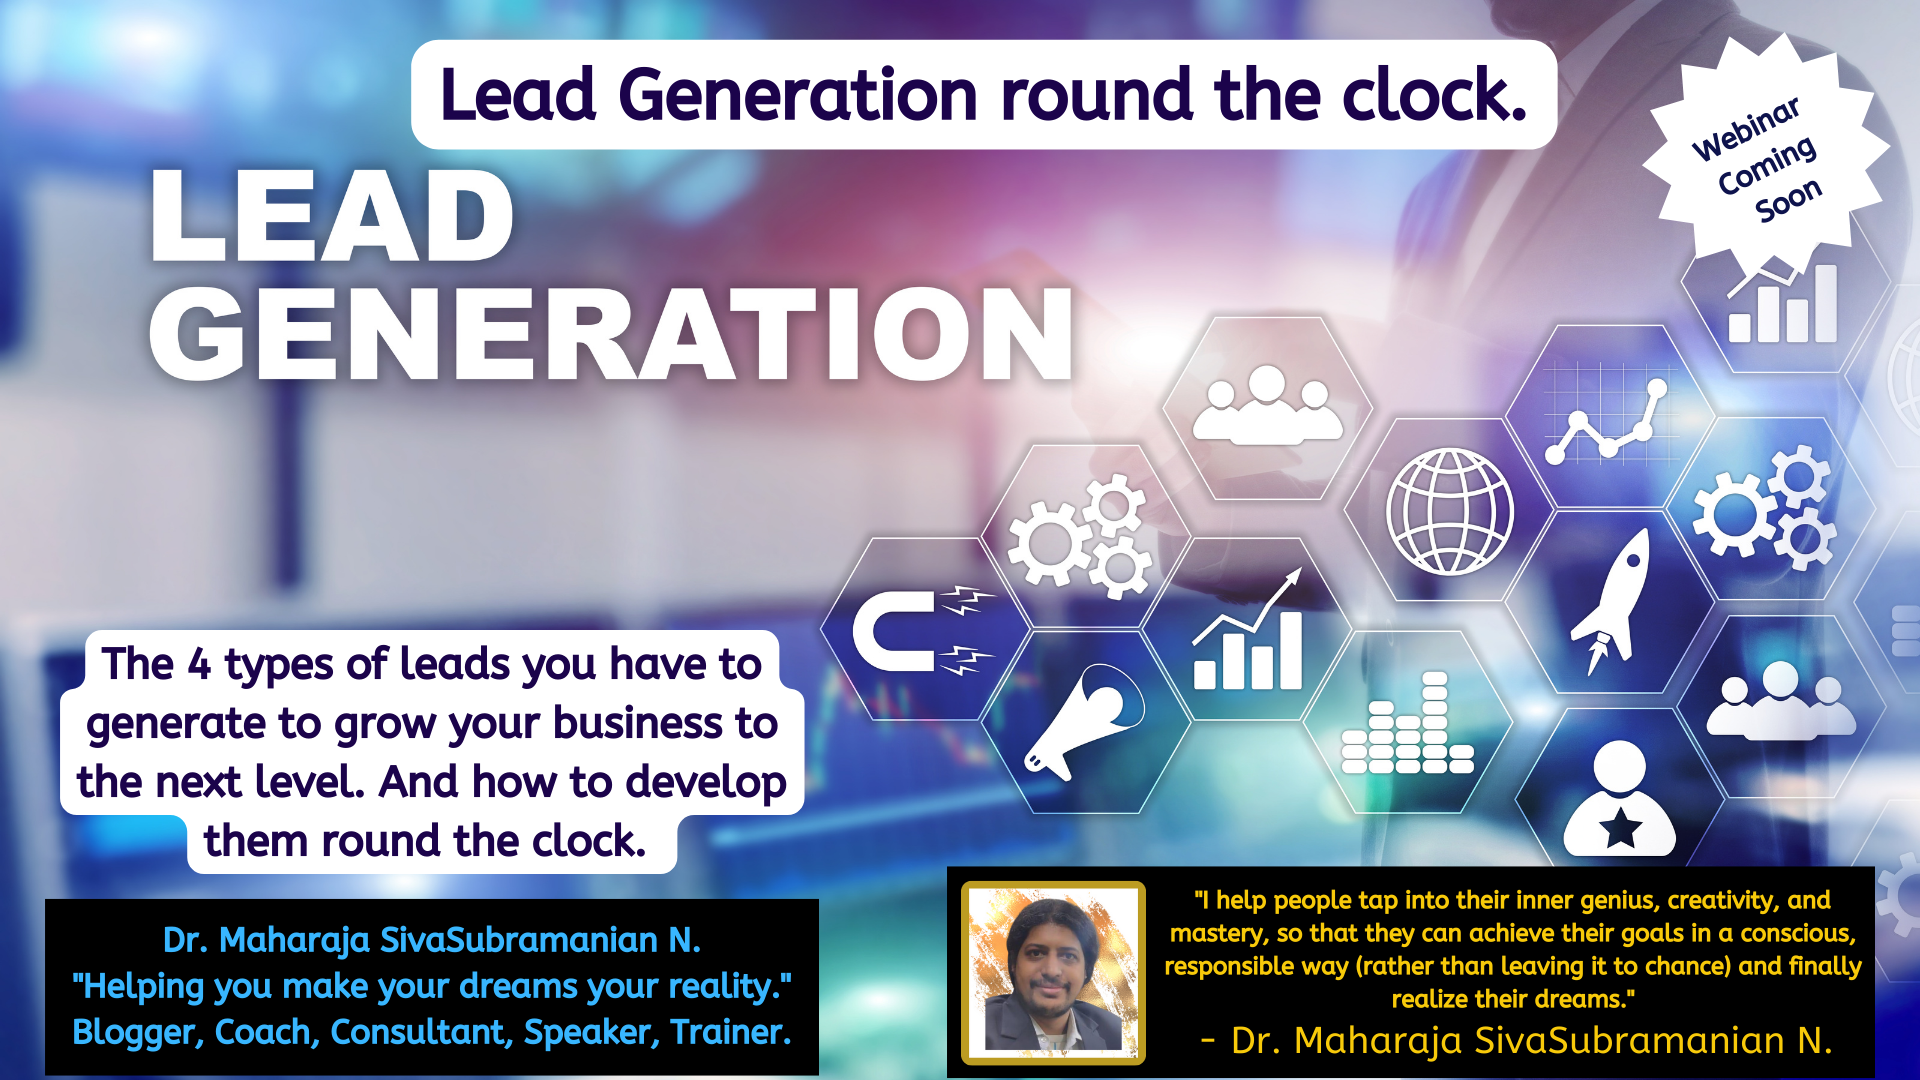 Lead Generation round the clock for sales professionals. – Upcoming free webinar.